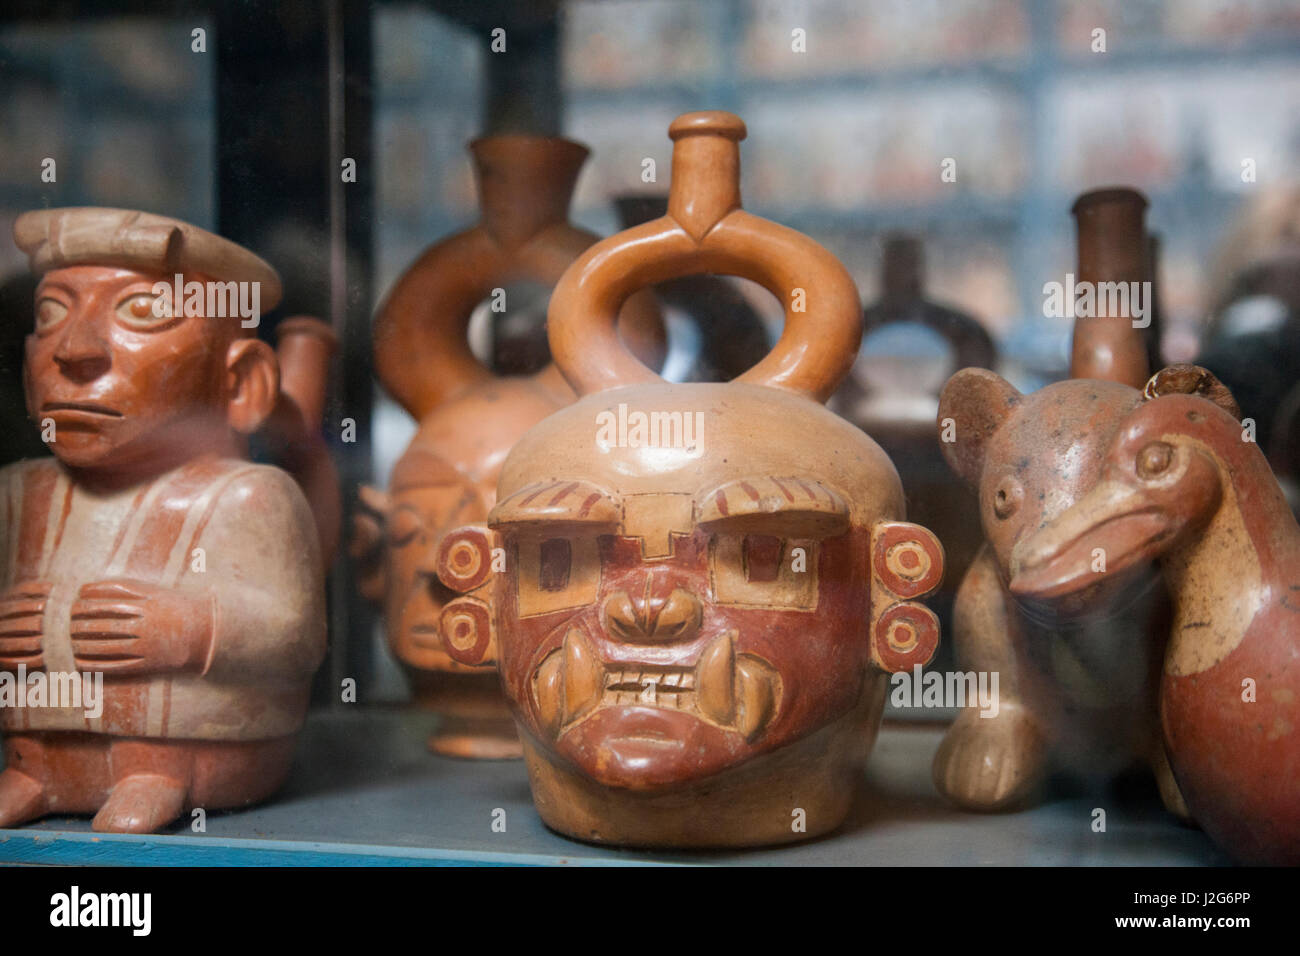 In 1926, the Rafael Larco Herrera was founded to house the vast collections of pre-Incan art and artifacts collected by the Larco family. These pieces are in the storage gallery of the museum and date from the Mochica civilization, 100A.D. to 800A.D. Stock Photo